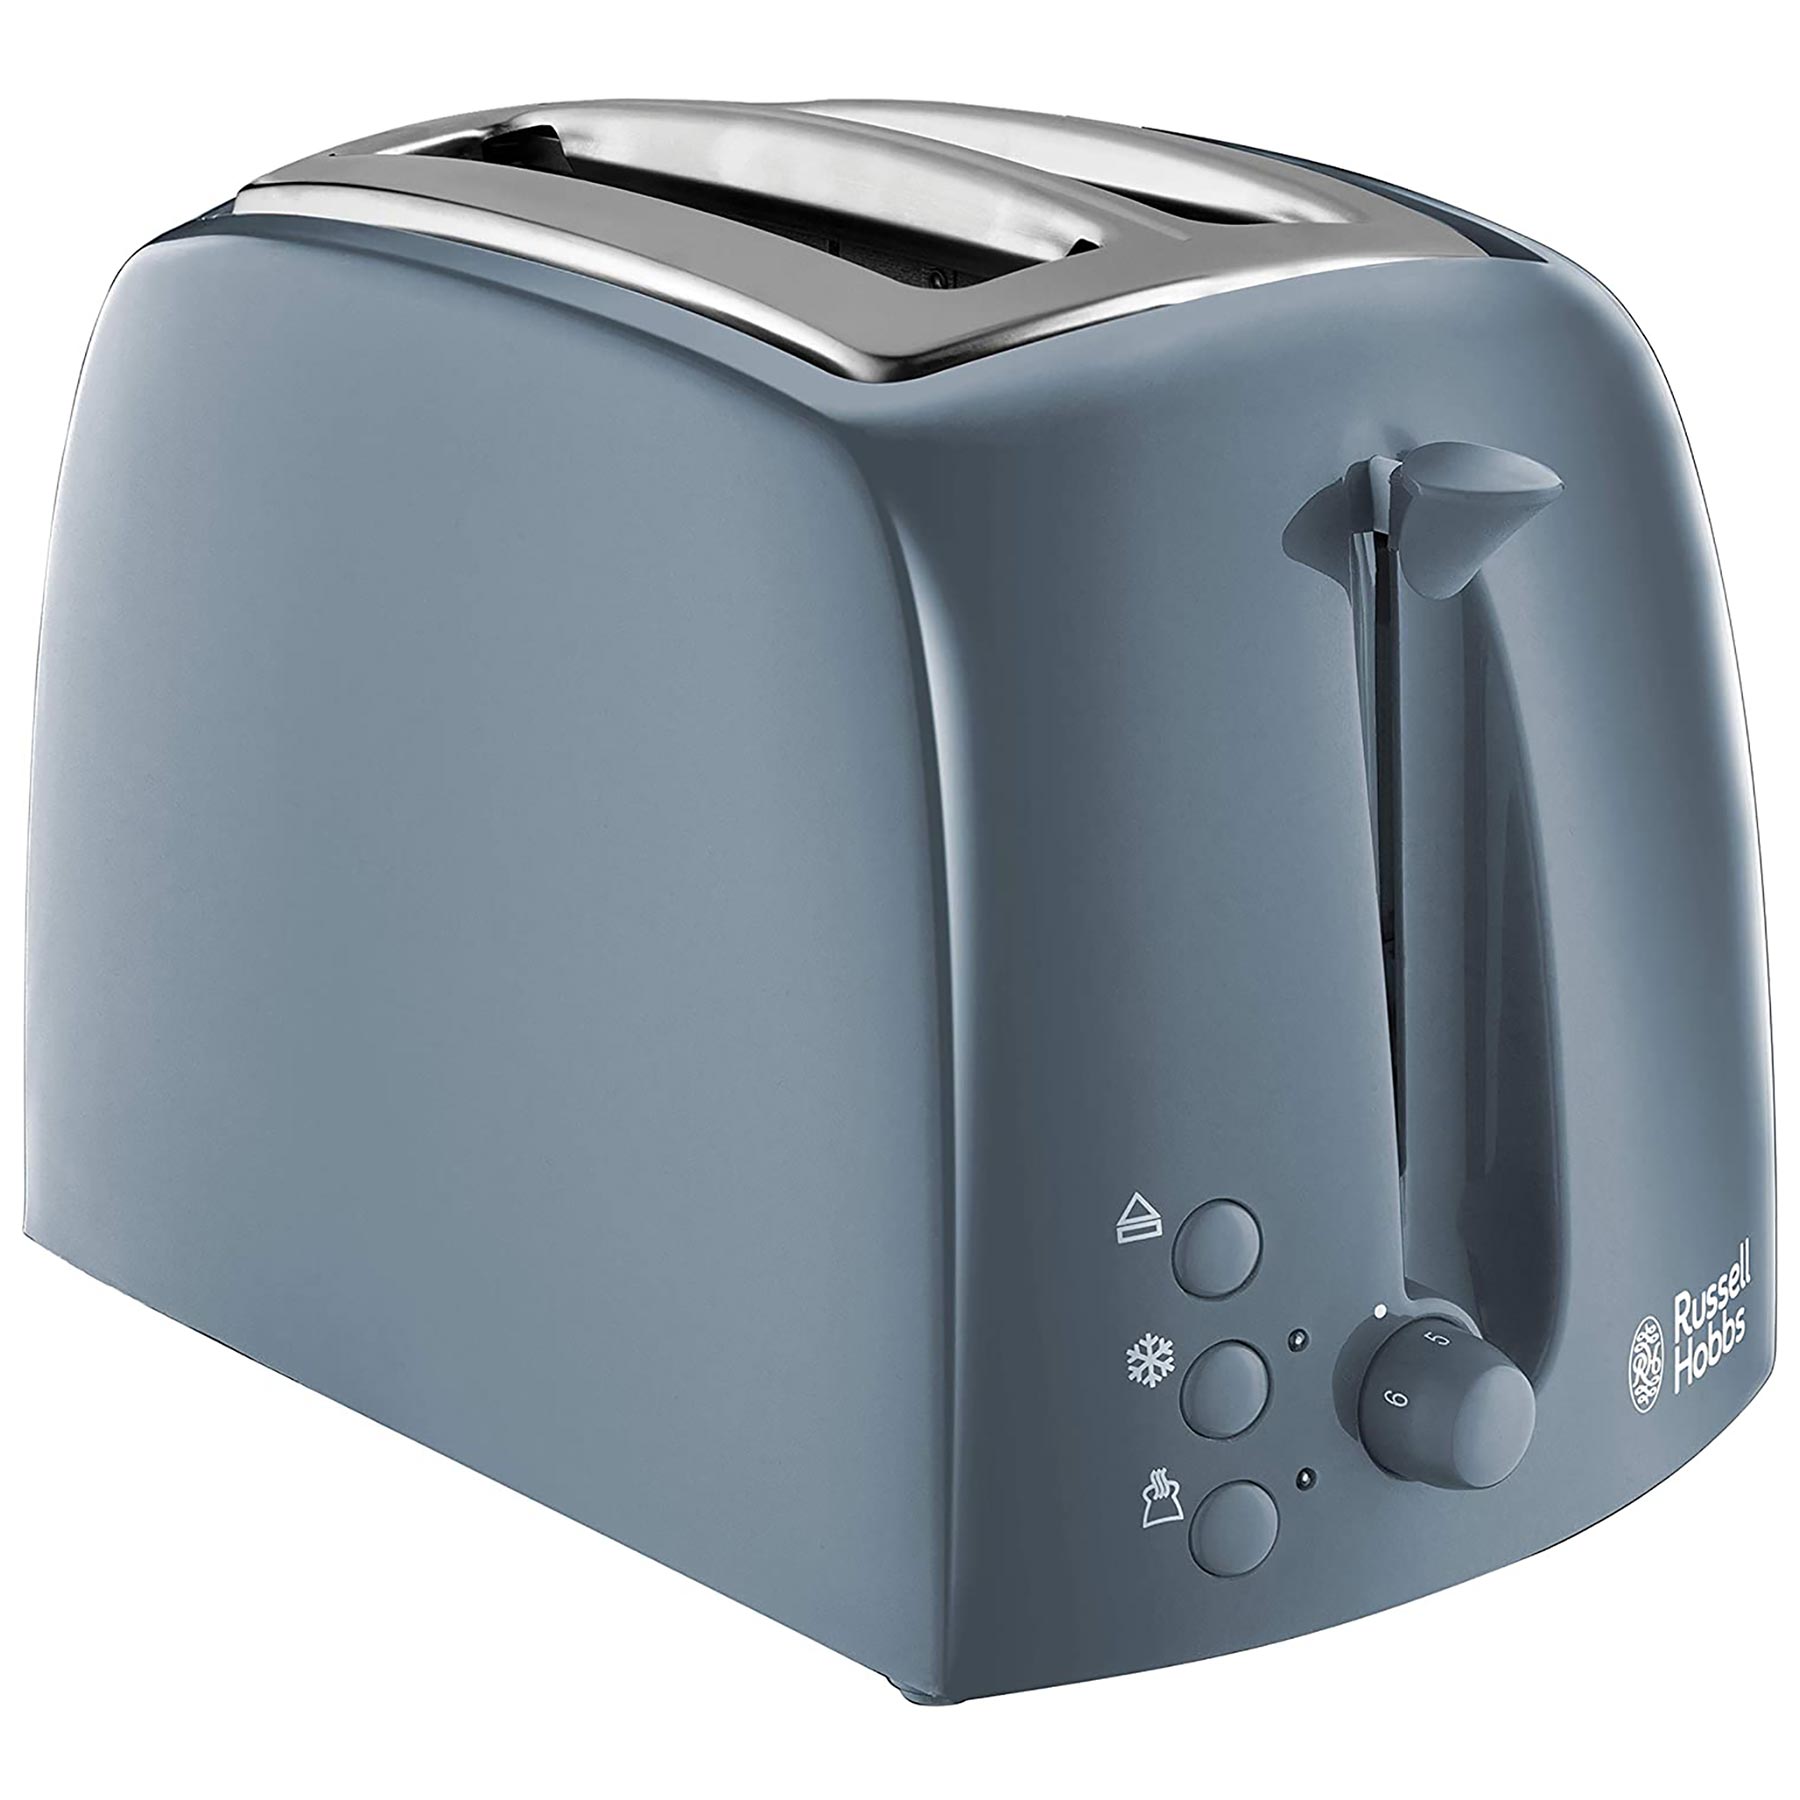 Image of Russell Hobbs 21644 Textures 2 Slice Toaster in Grey